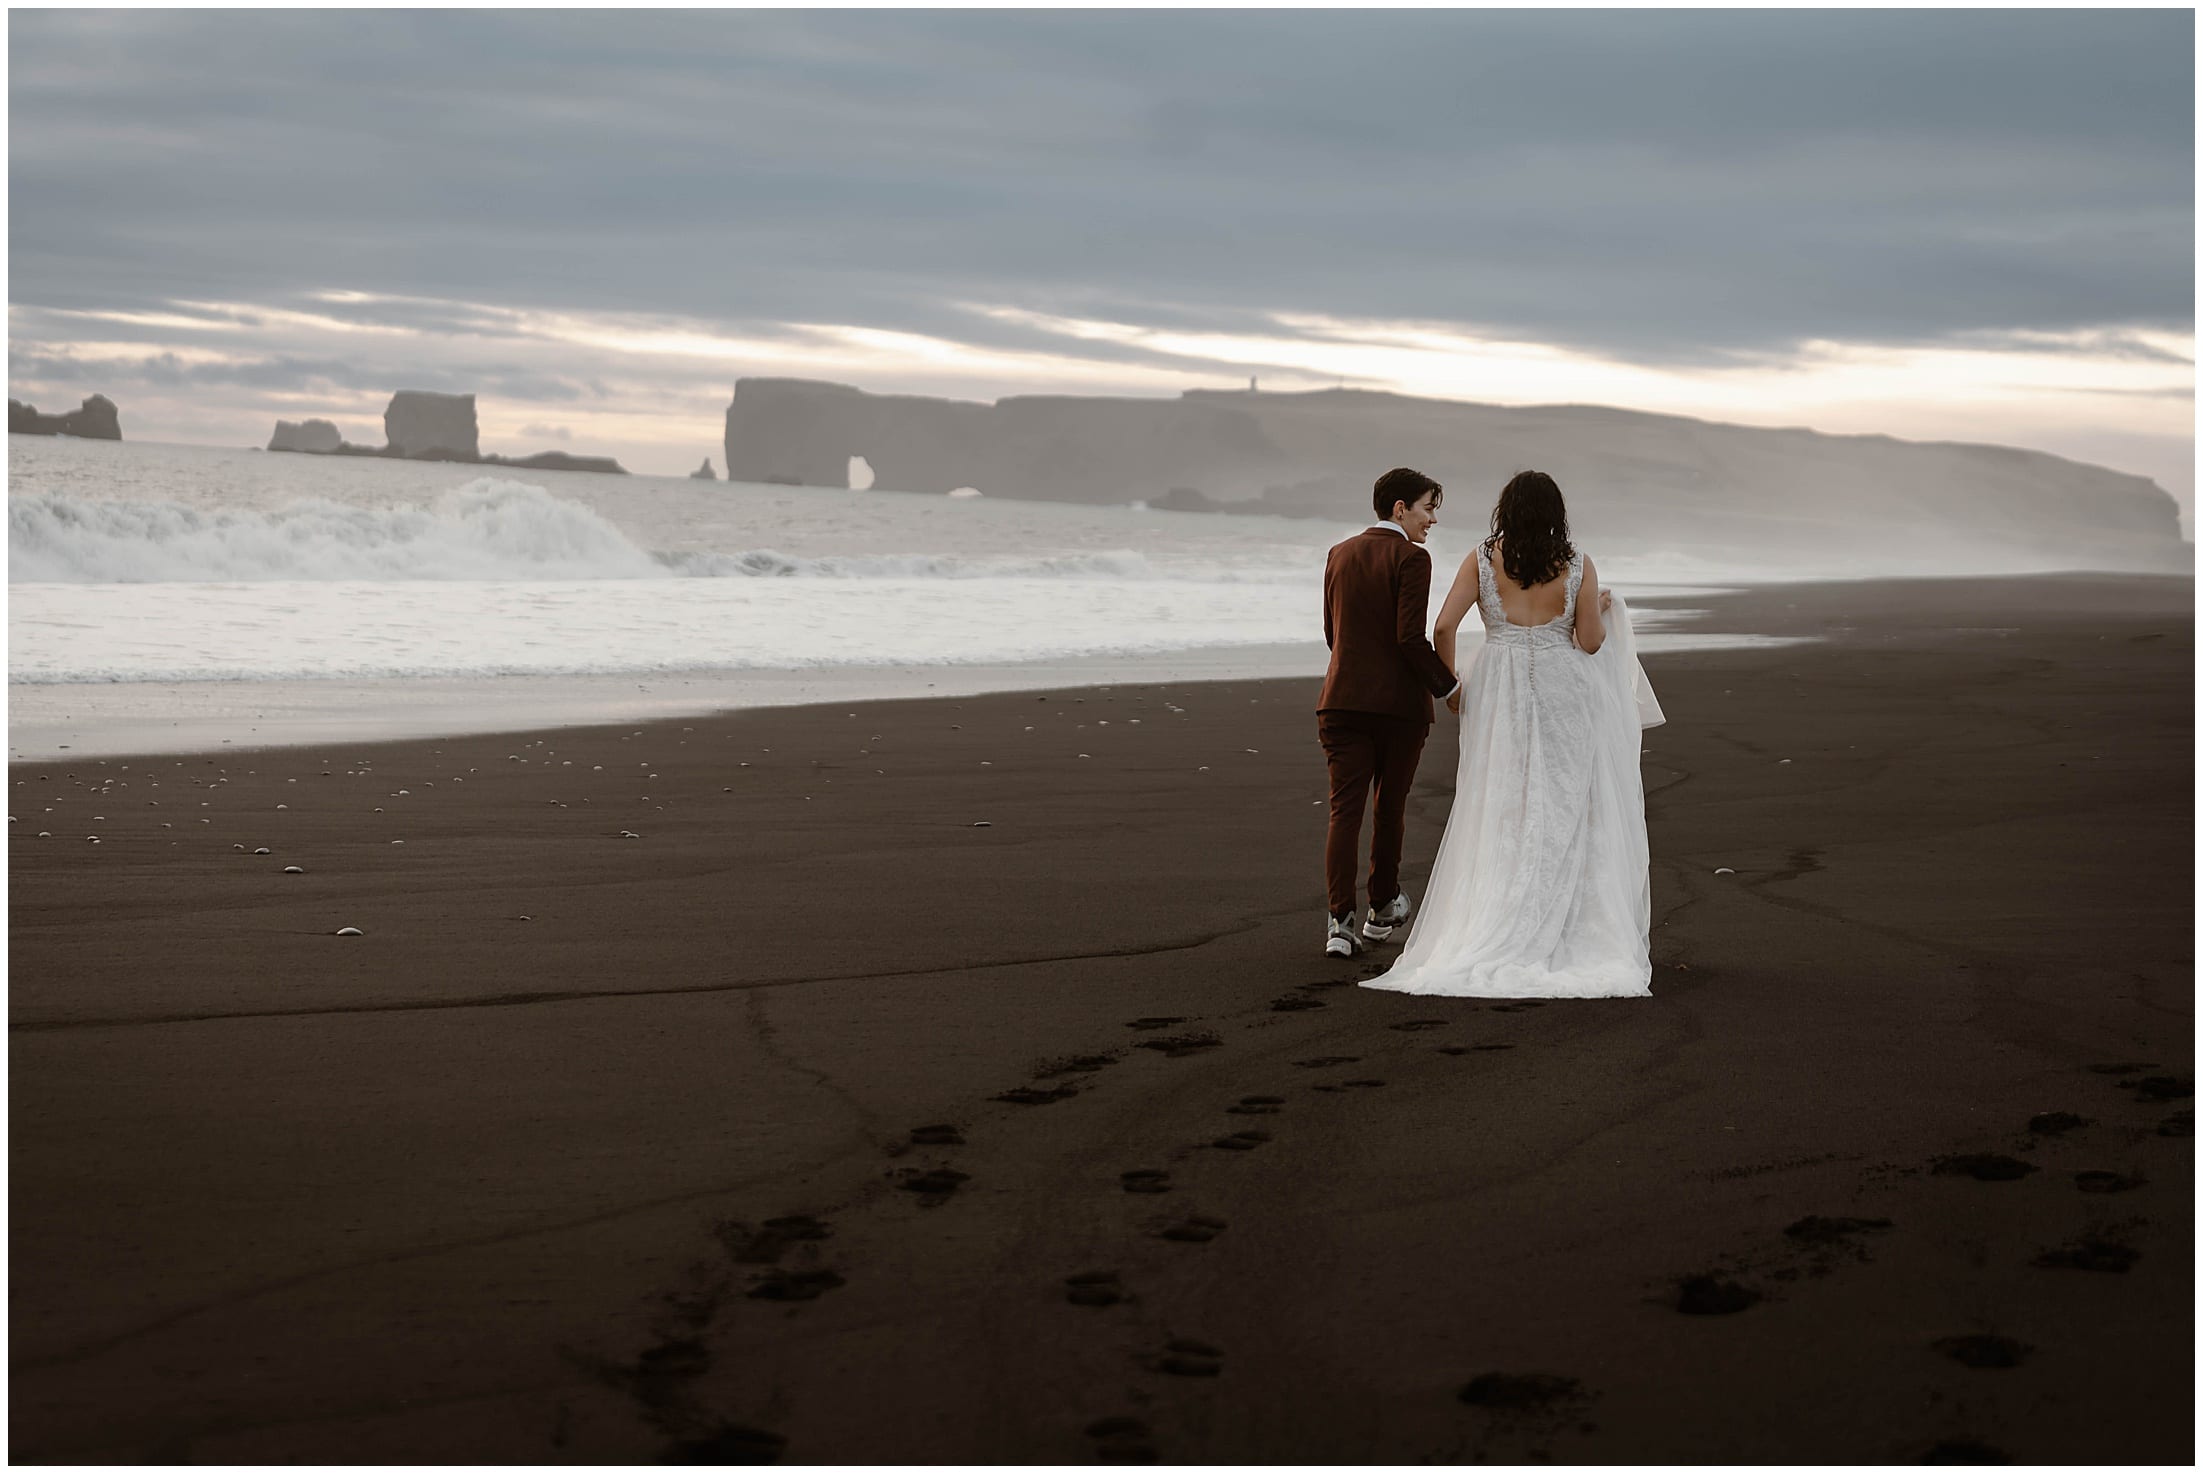 iceland elopement, how to elope in iceland, iceland elopement photographer, iceland elopement packages, how much does it cost to elope in iceland, is it easy to elope in iceland, gay marriage in iceland, cliff elopement, blacksand beach elopement, lighthouse elopement in iceland, iceland northern lights elopement, iceland elopement planner, can i elope in iceland, all inclusive elopement package, brit nicole photography, best elopement photographer, best iceland elopement photographer, affordable elopement photographer